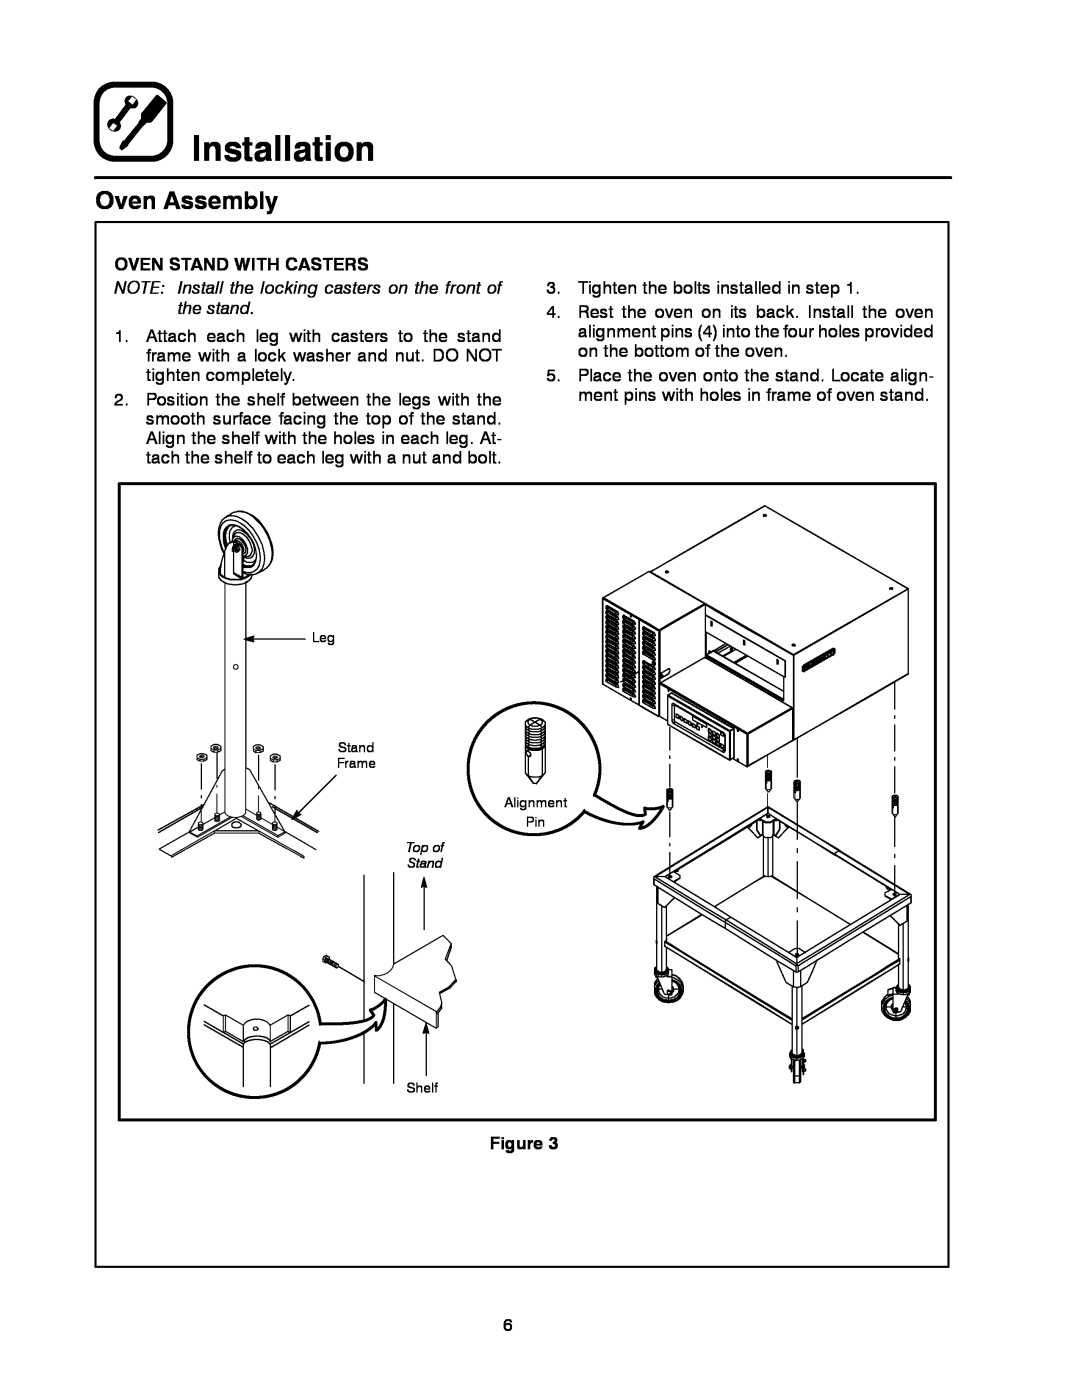 Blodgett MT1828G, MT1828E manual Oven Assembly, Installation, Oven Stand With Casters 